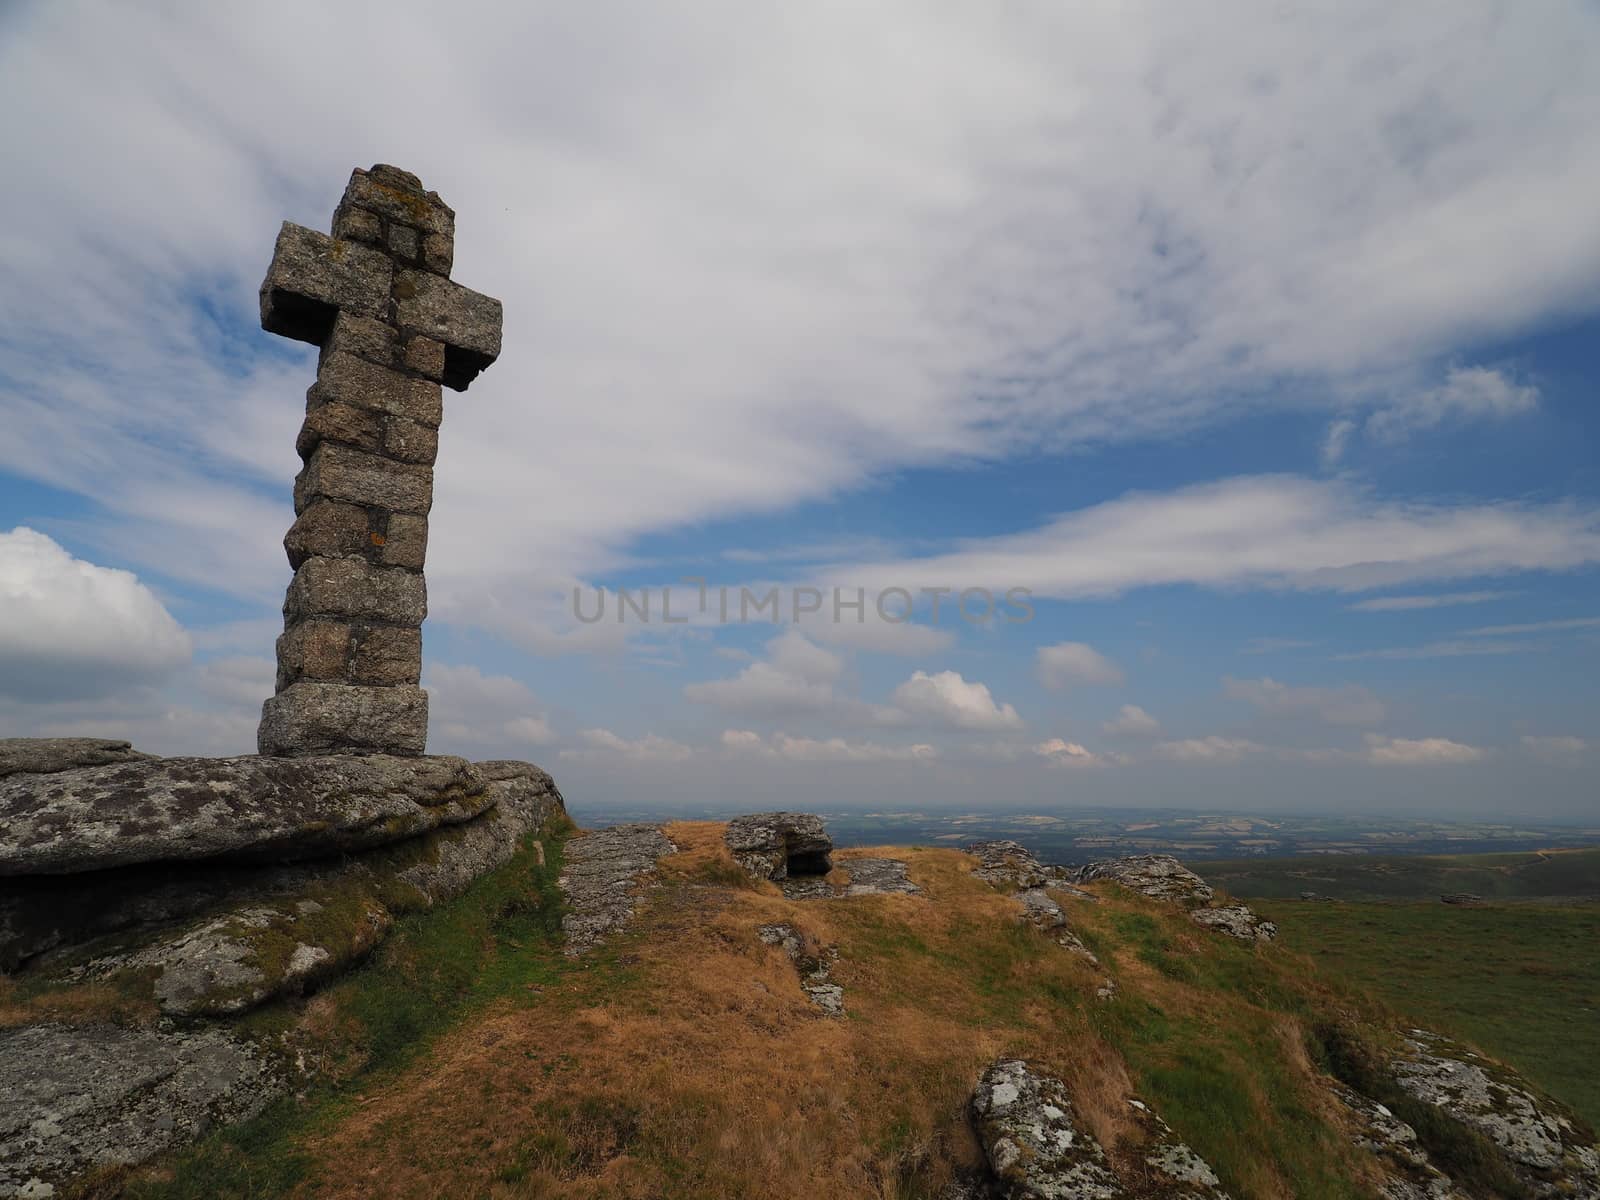 View from Brat Tor and Widgery Cross with white clouds in a blue sky, Dartmoor by PhilHarland